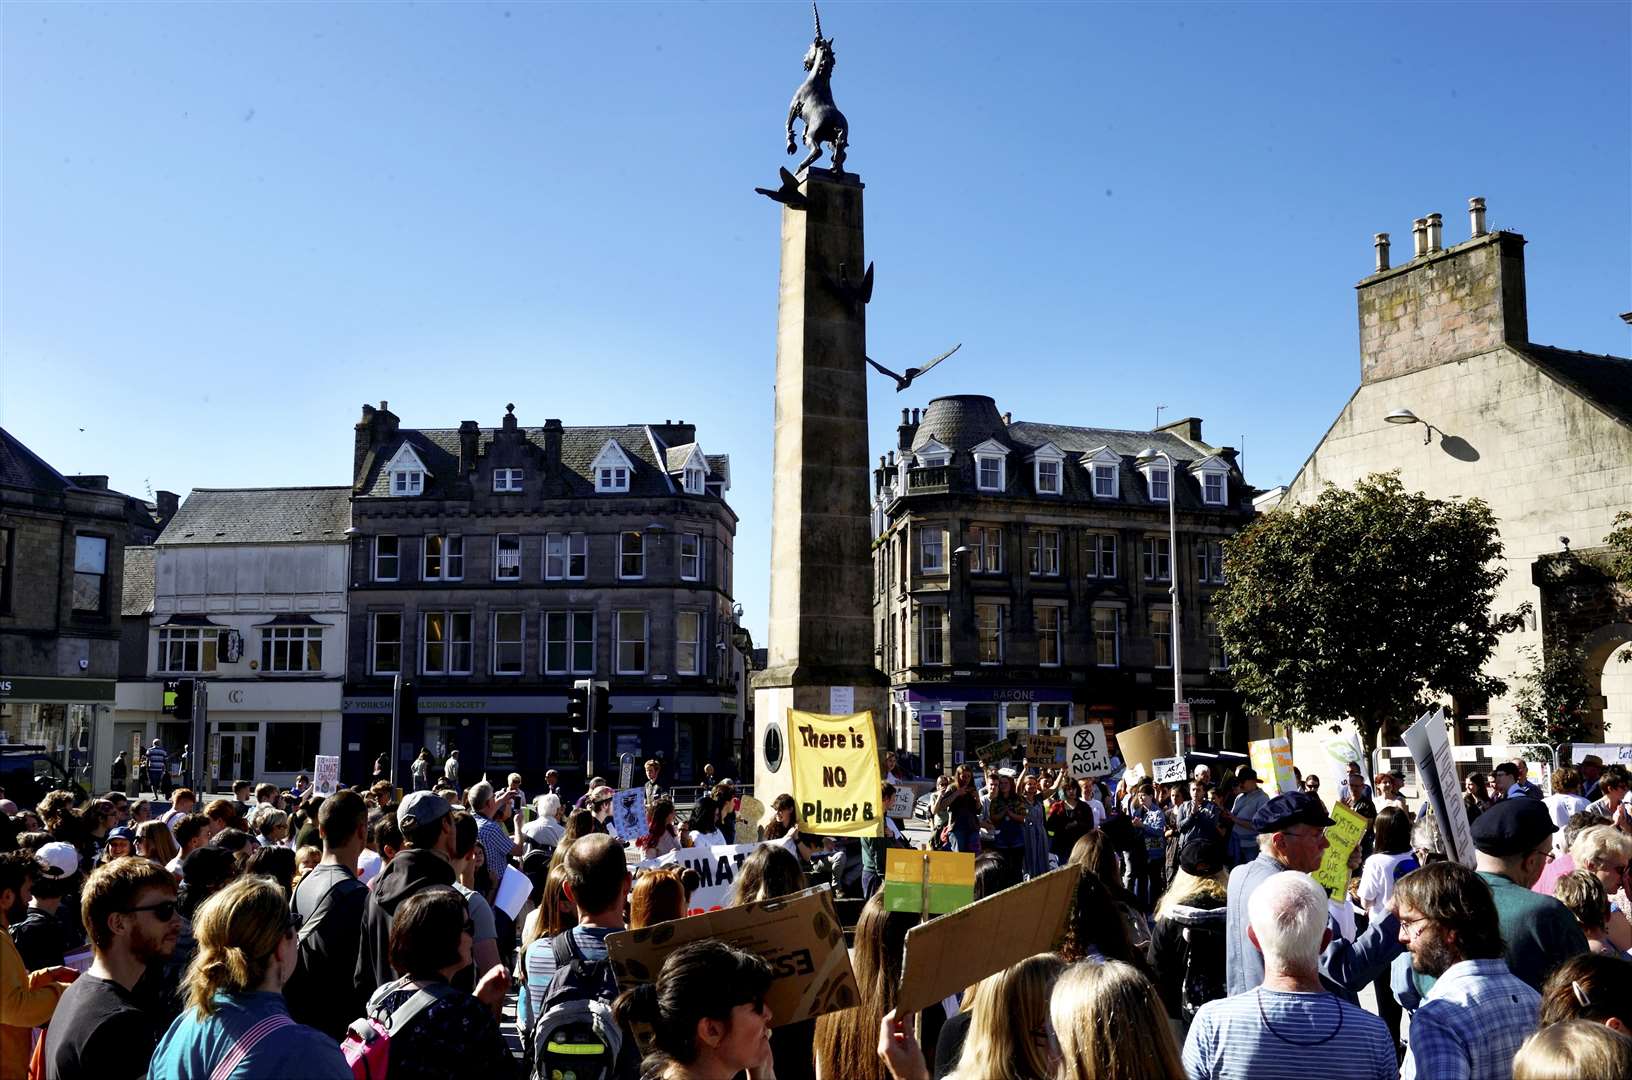 Hundreds of people took part in climate change protests in Falcon Square last year.